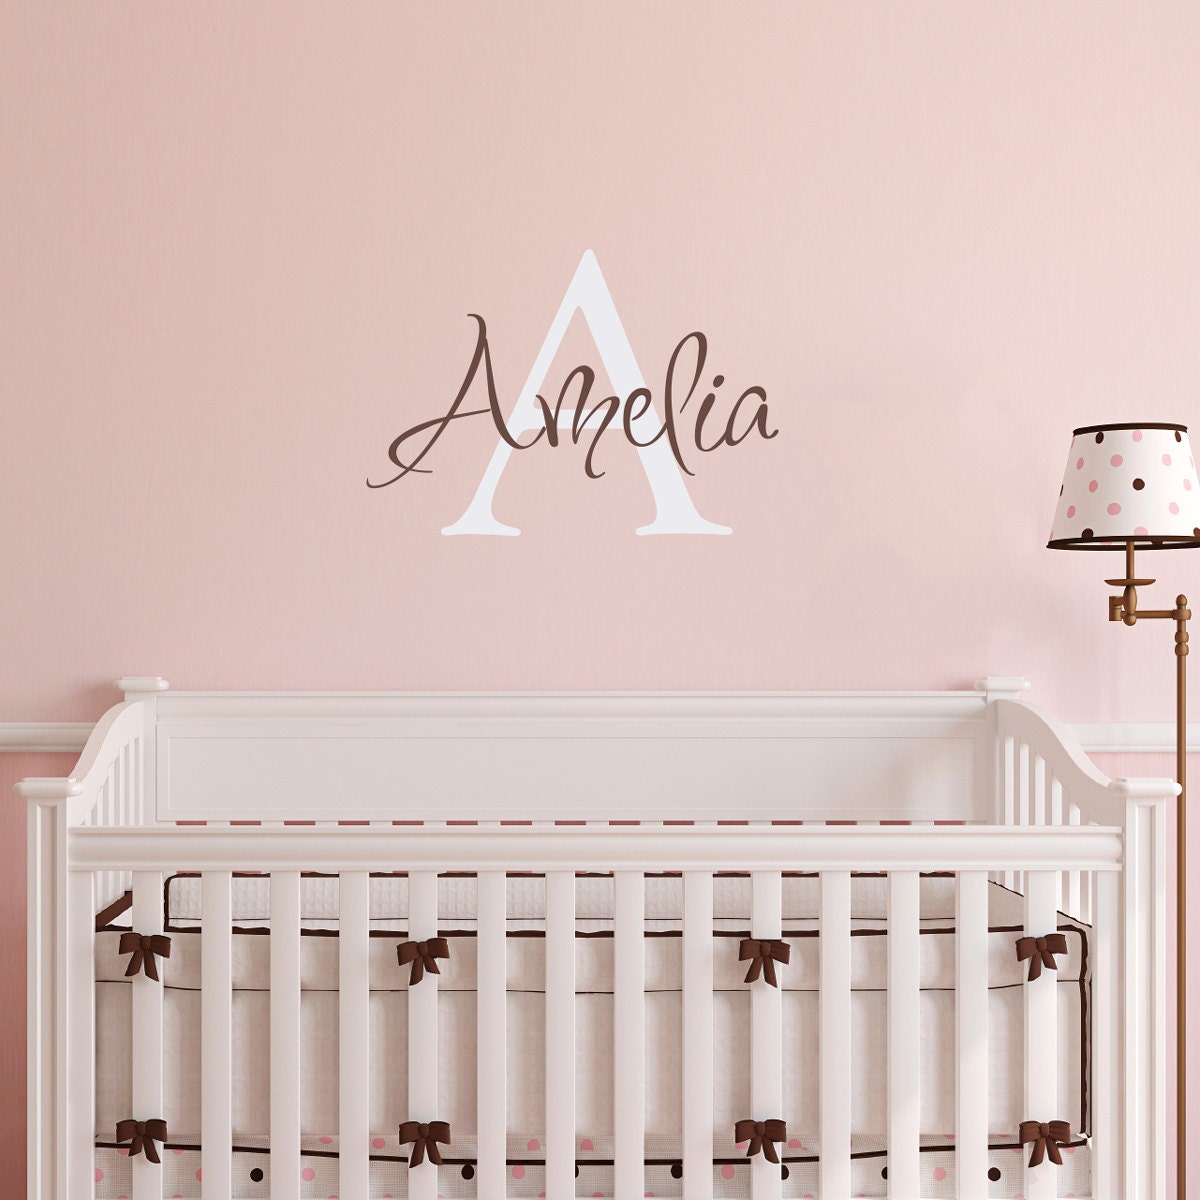 Initial & Name Wall Decal - Girls Name Decal - Initial Wall Sticker - Medium (3)